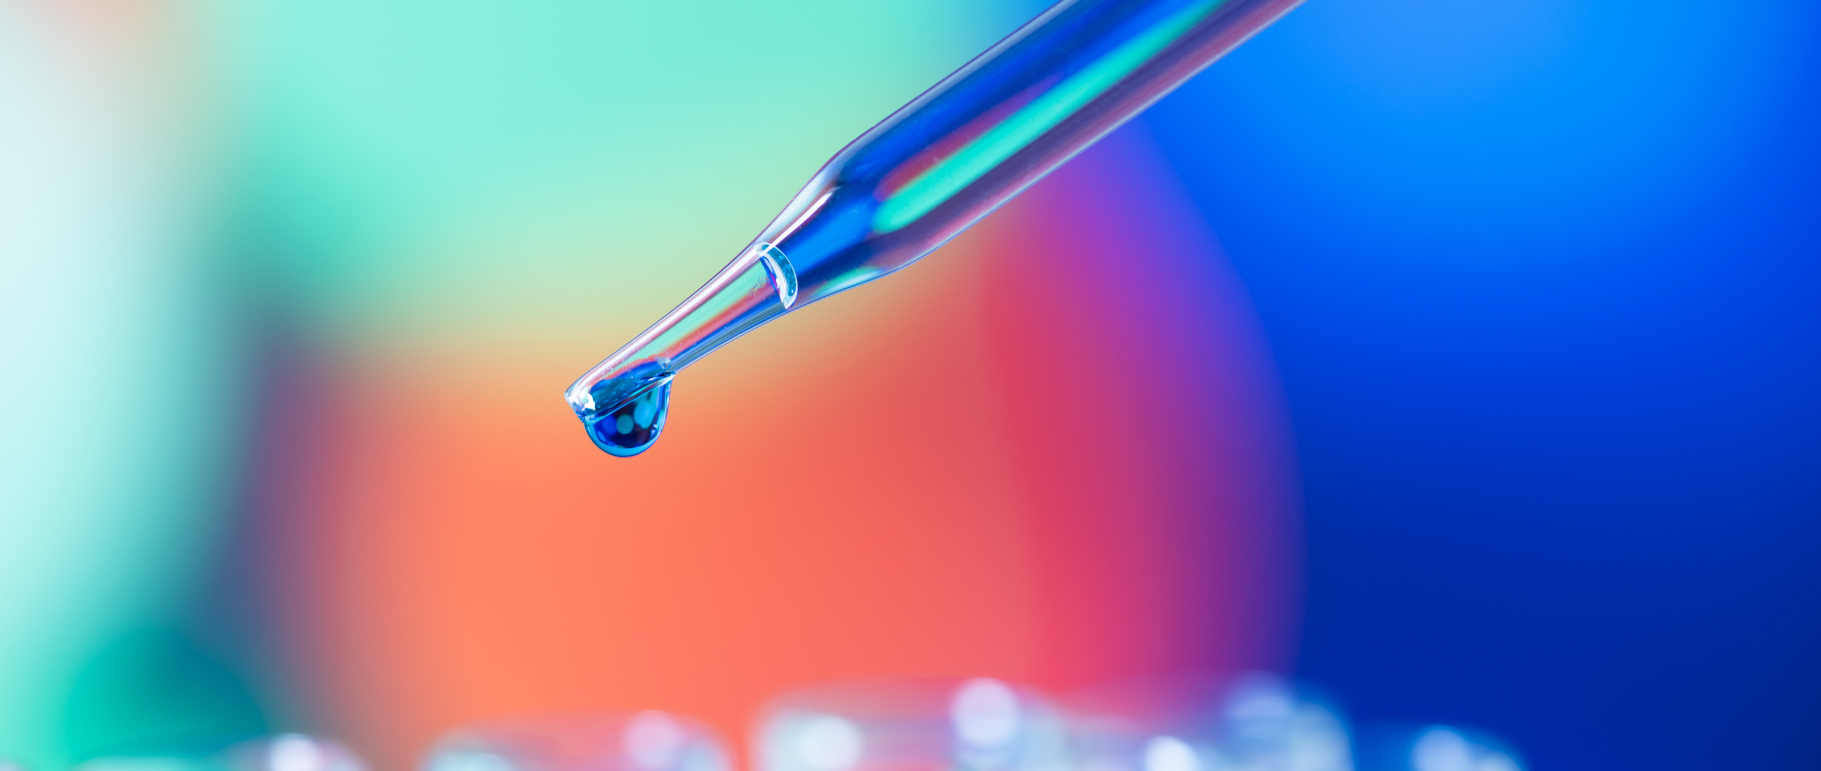 A pipette dripping some solution in front of a blurred background